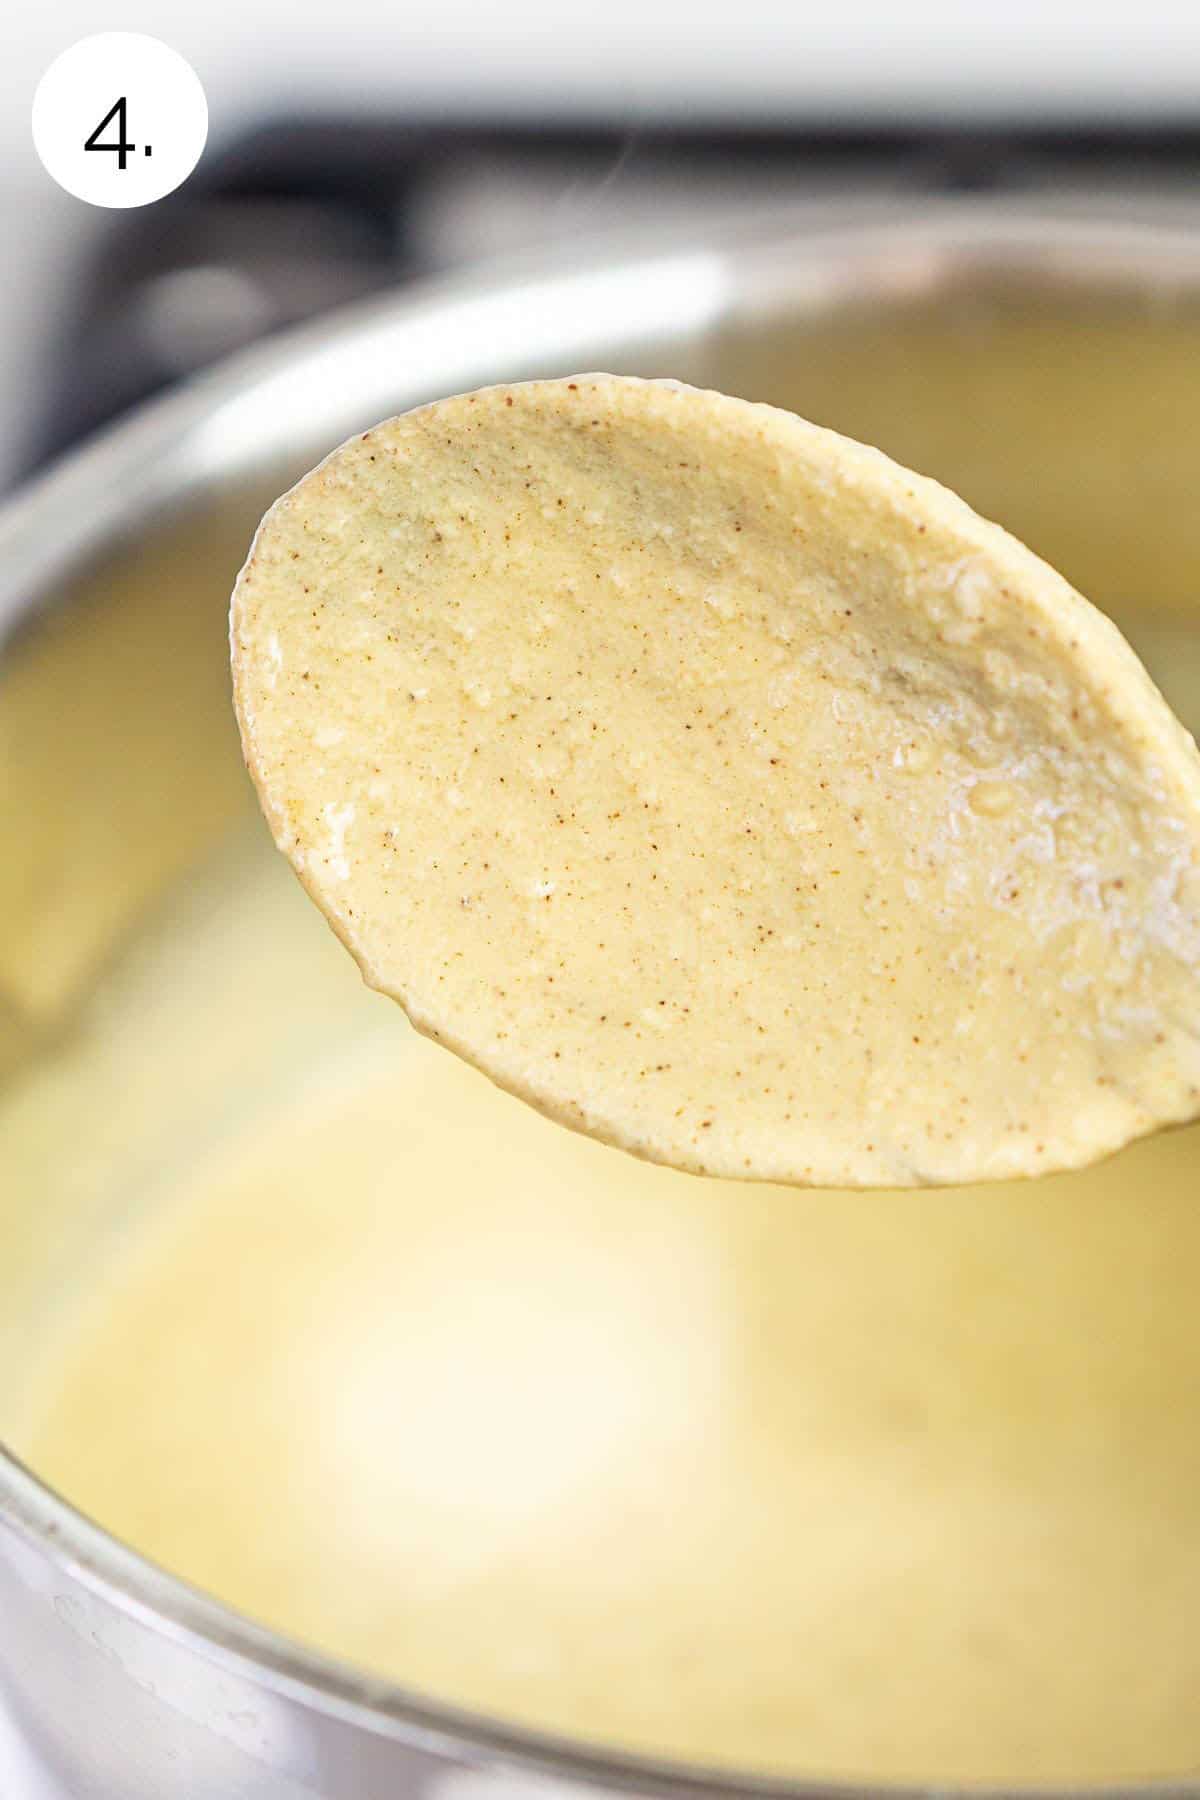 The ice cream custard mixture coating a wooden spoon after cooking on the stove.